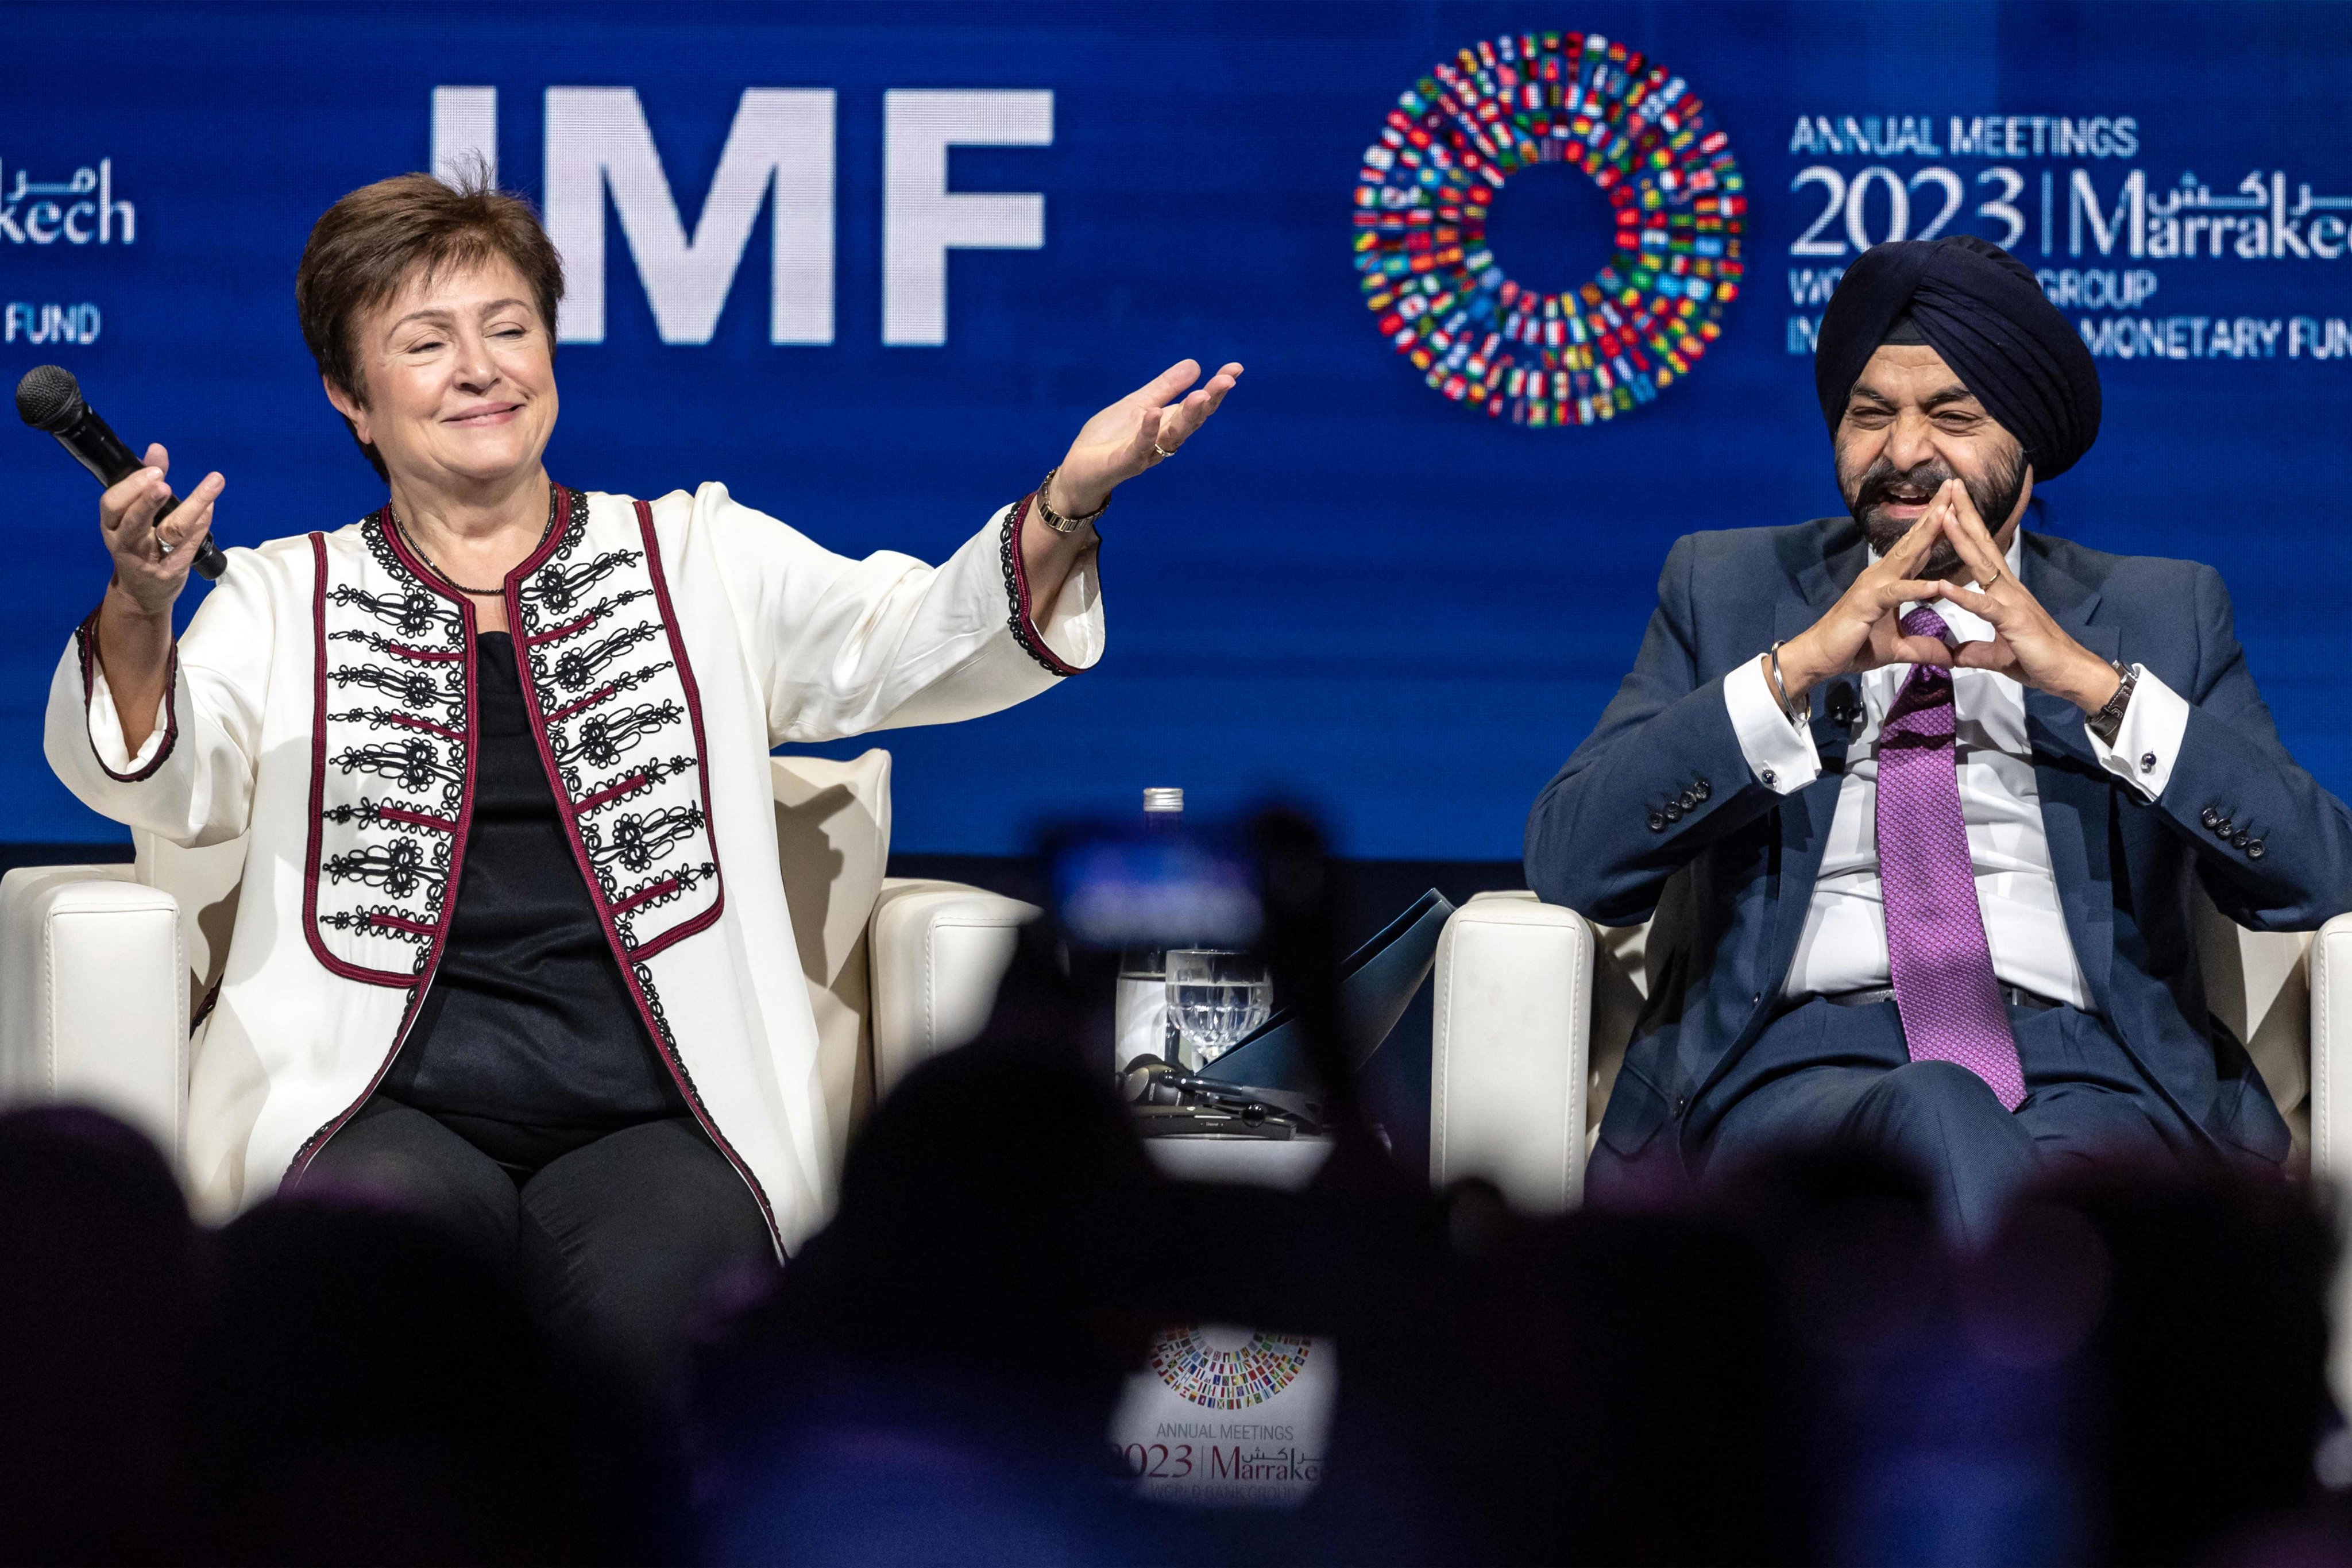 IMF managing director Kristalina Georgieva and World Bank president Ajay Banga hold a press conference during the IMF/World Bank annual meetings in Marrakesh, Morocco, on October 12. Unless radical reforms are taken, the IMF and World Bank could go the same way as the WTO. Photo: AFP